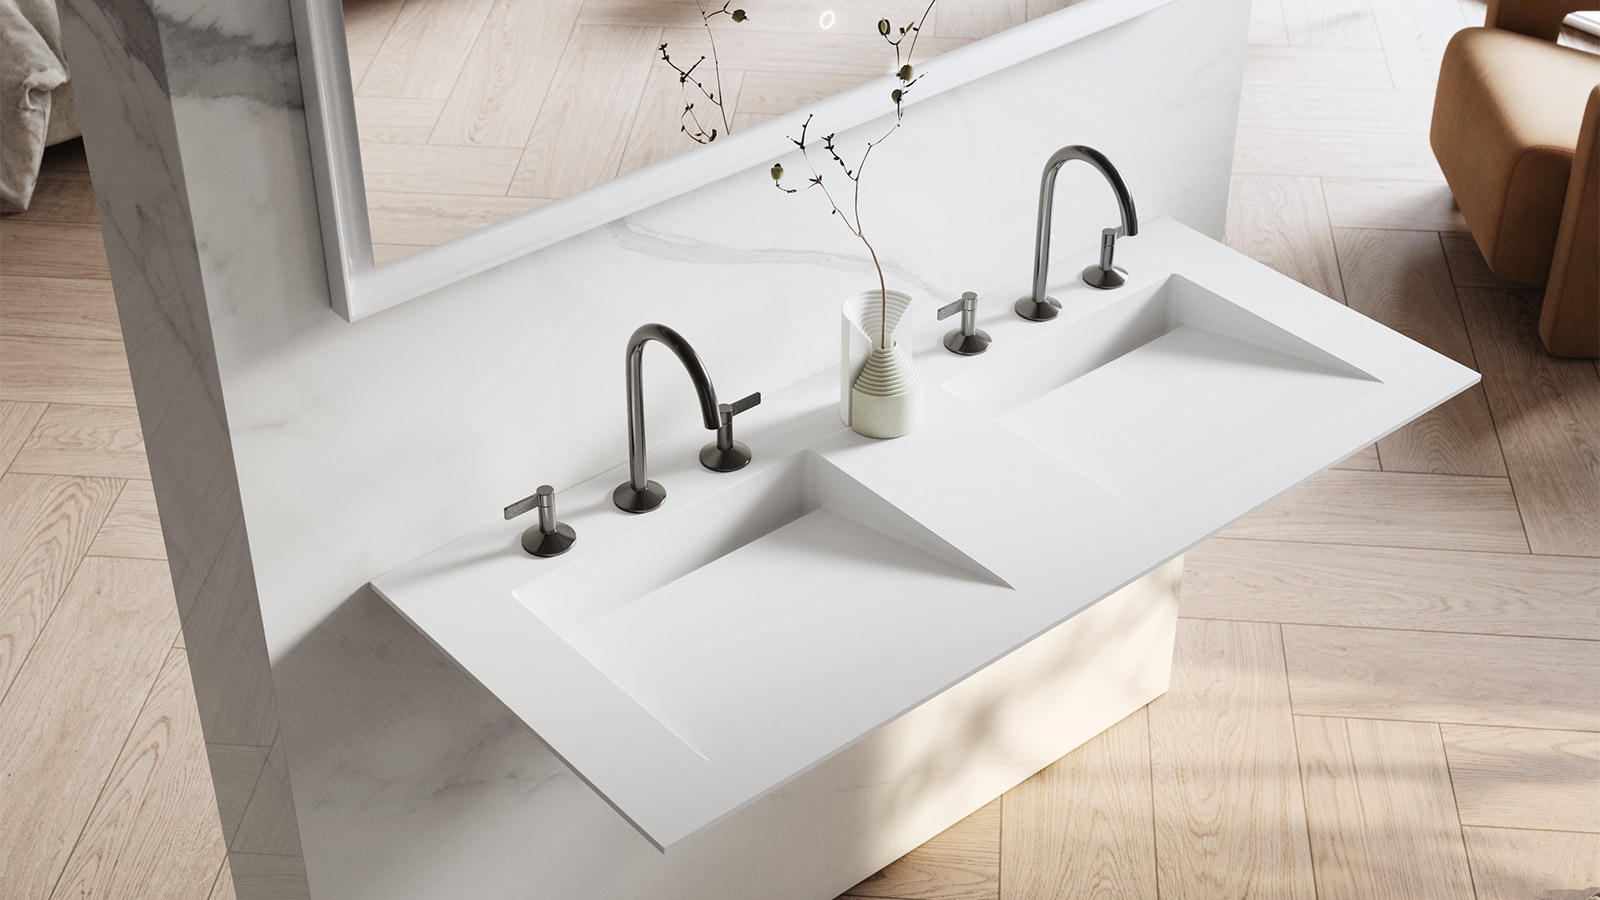 NER, the new countertop and bathroom furniture collection designed by Fran Silvestre